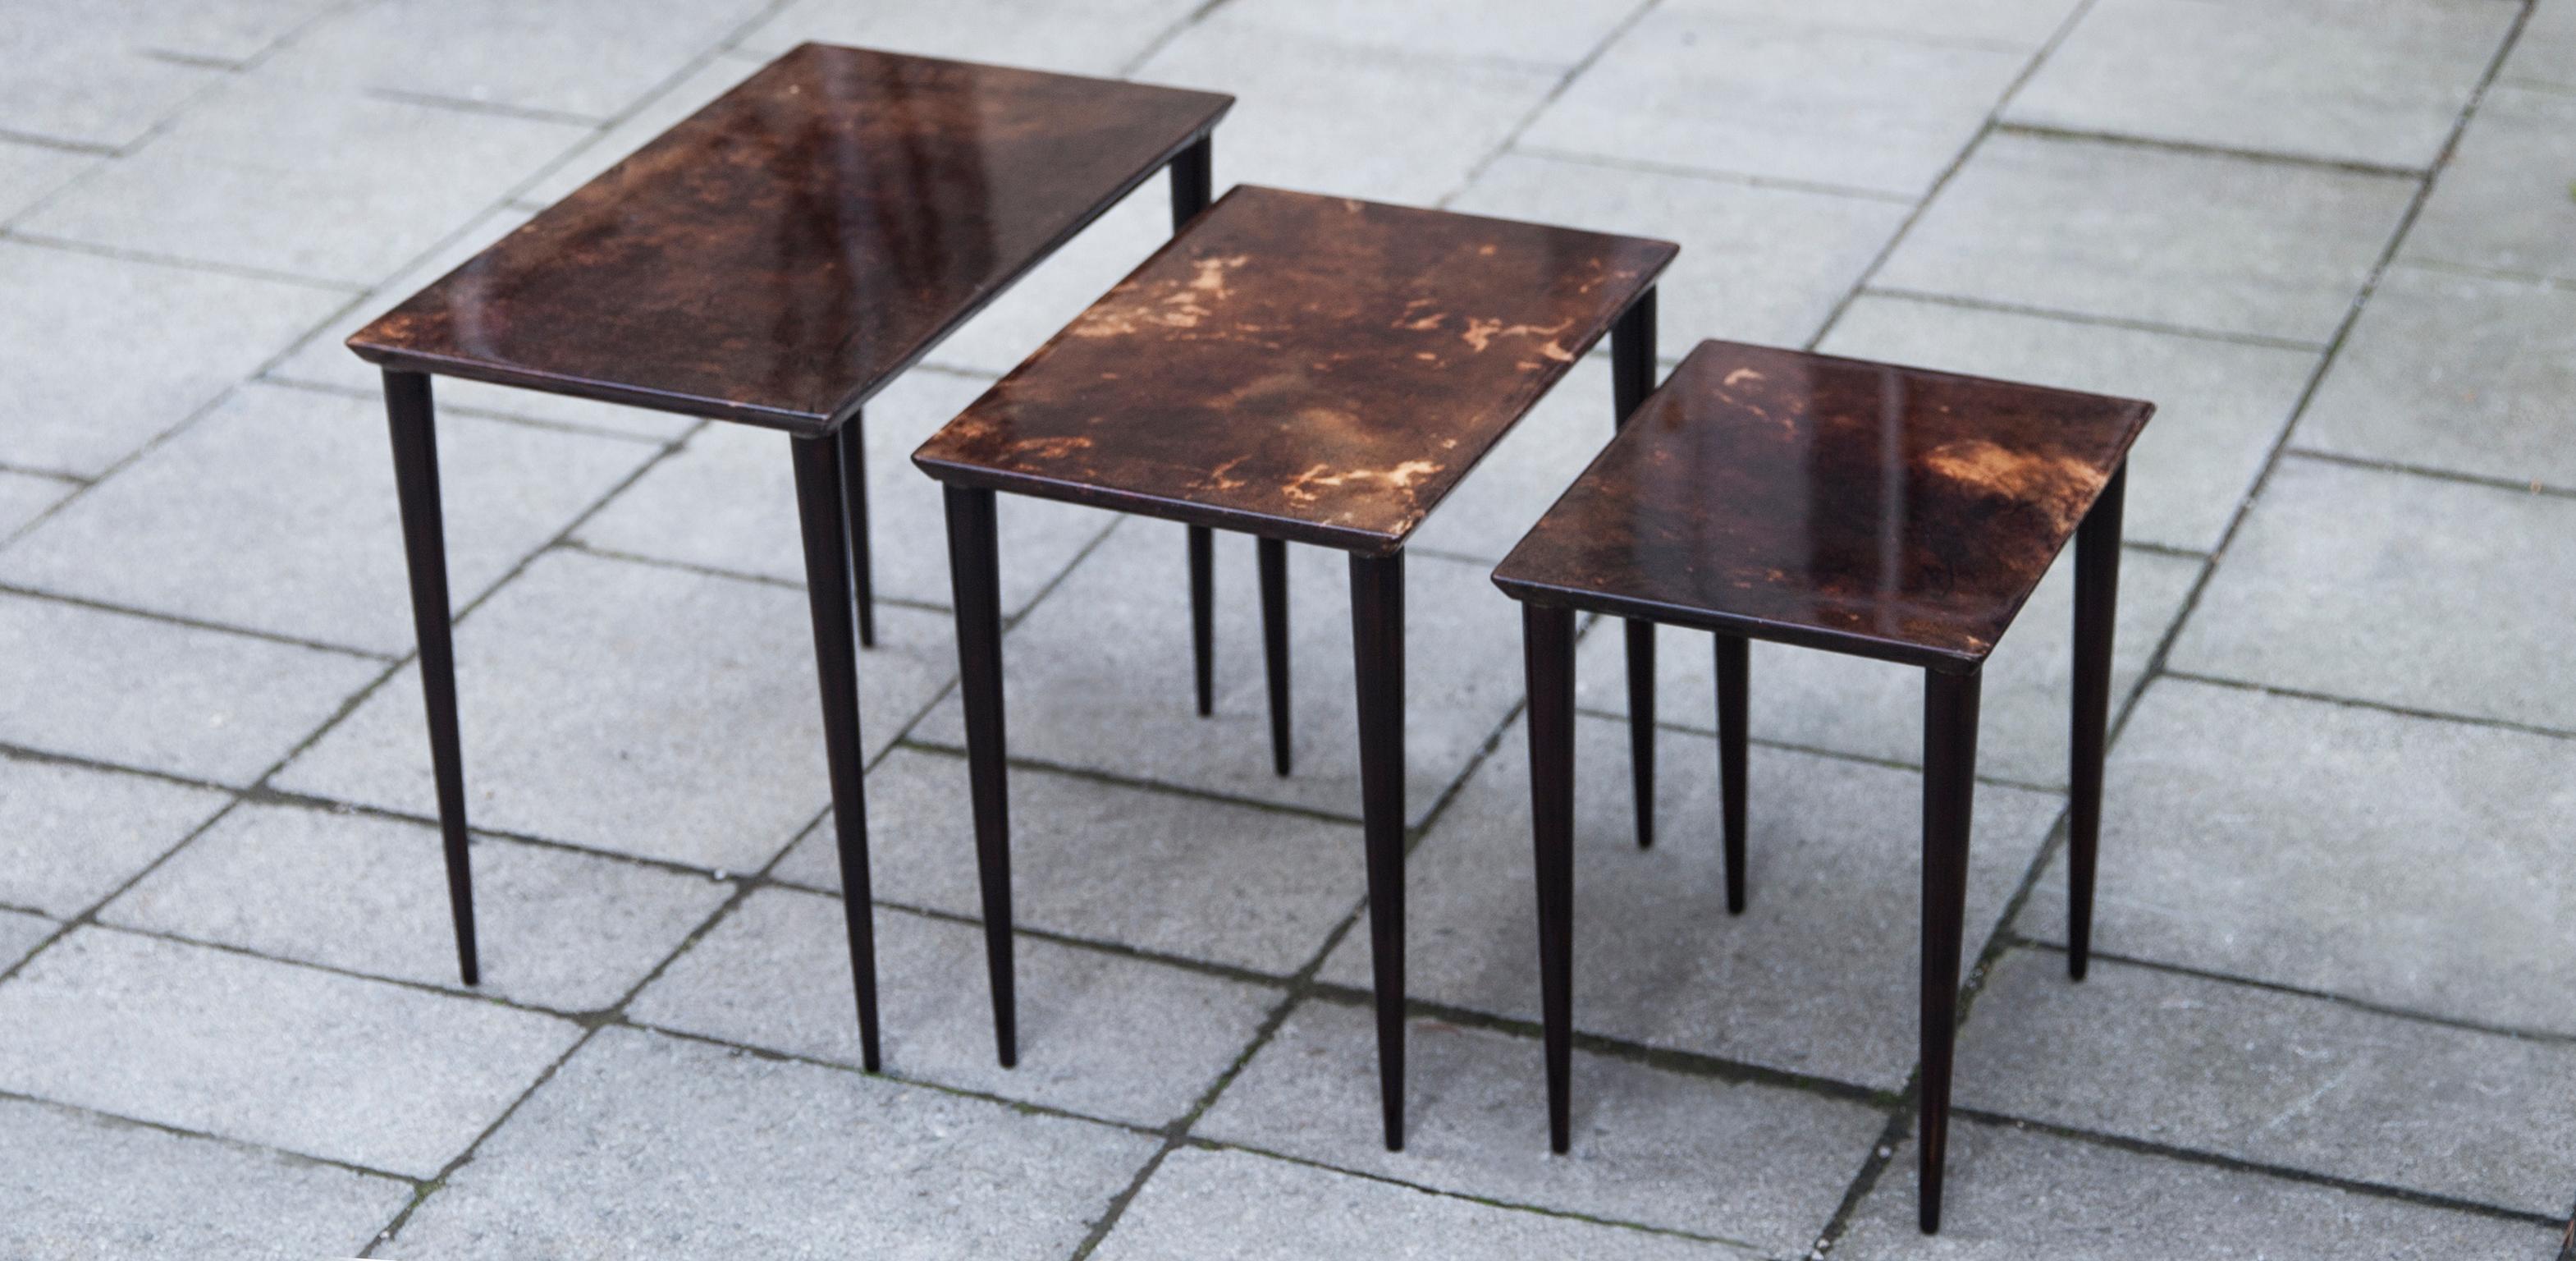 Set of three Aldo Tura nesting tables in lacquered goatskin and tanned pearwood legs. This particular set was executed, circa 1960 and is in perfect condition. Along with artists like Piero Fornasetti and Carlo Bugatti, Aldo Tura (1909-1963)